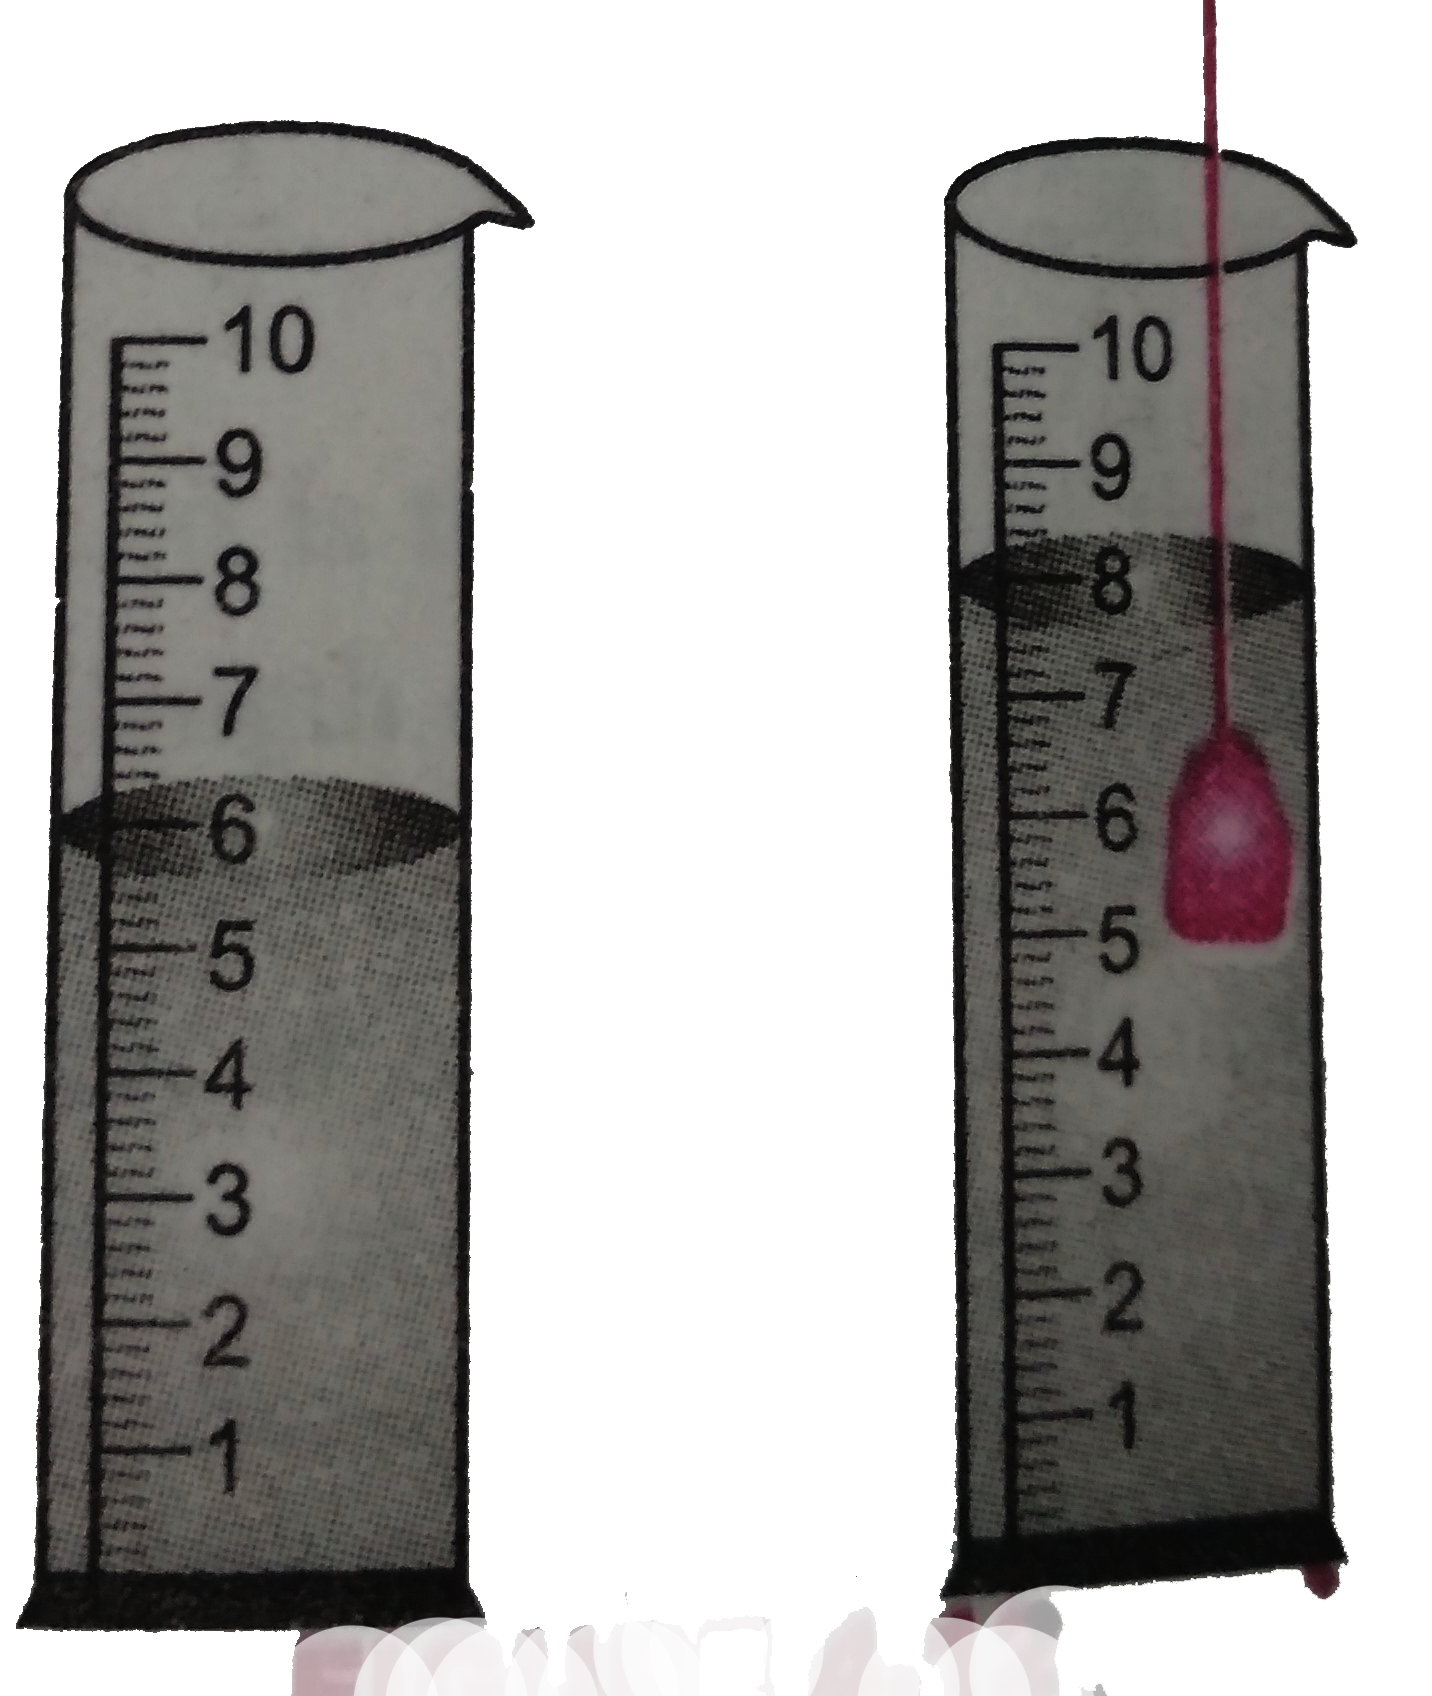 A measuring cylinder (caliberated in cm^3 ) shown in Fig. is used to measure the level of water before and after immersing a solid in it. The volume of the given solid is: